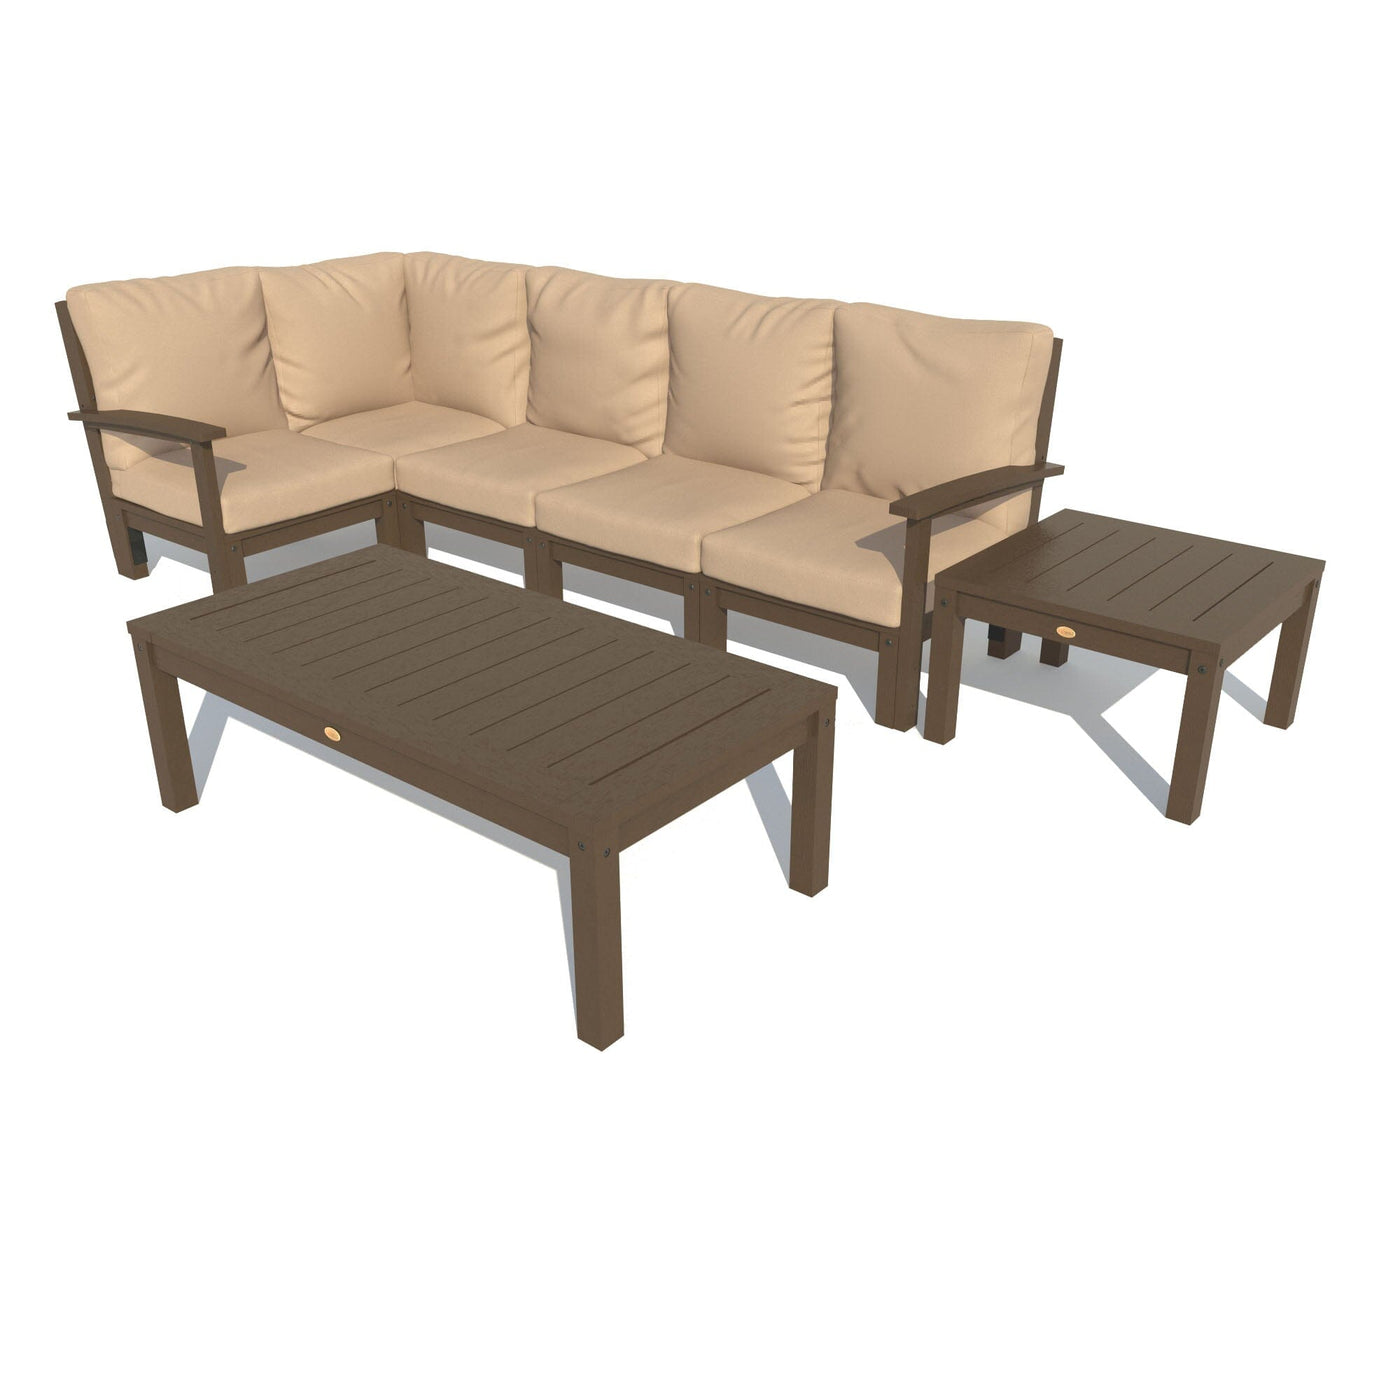 Bespoke Deep Seating: 7 Piece Sectional Set with Conversation and Side Table Deep Seating Highwood USA Dune Weathered Acorn 